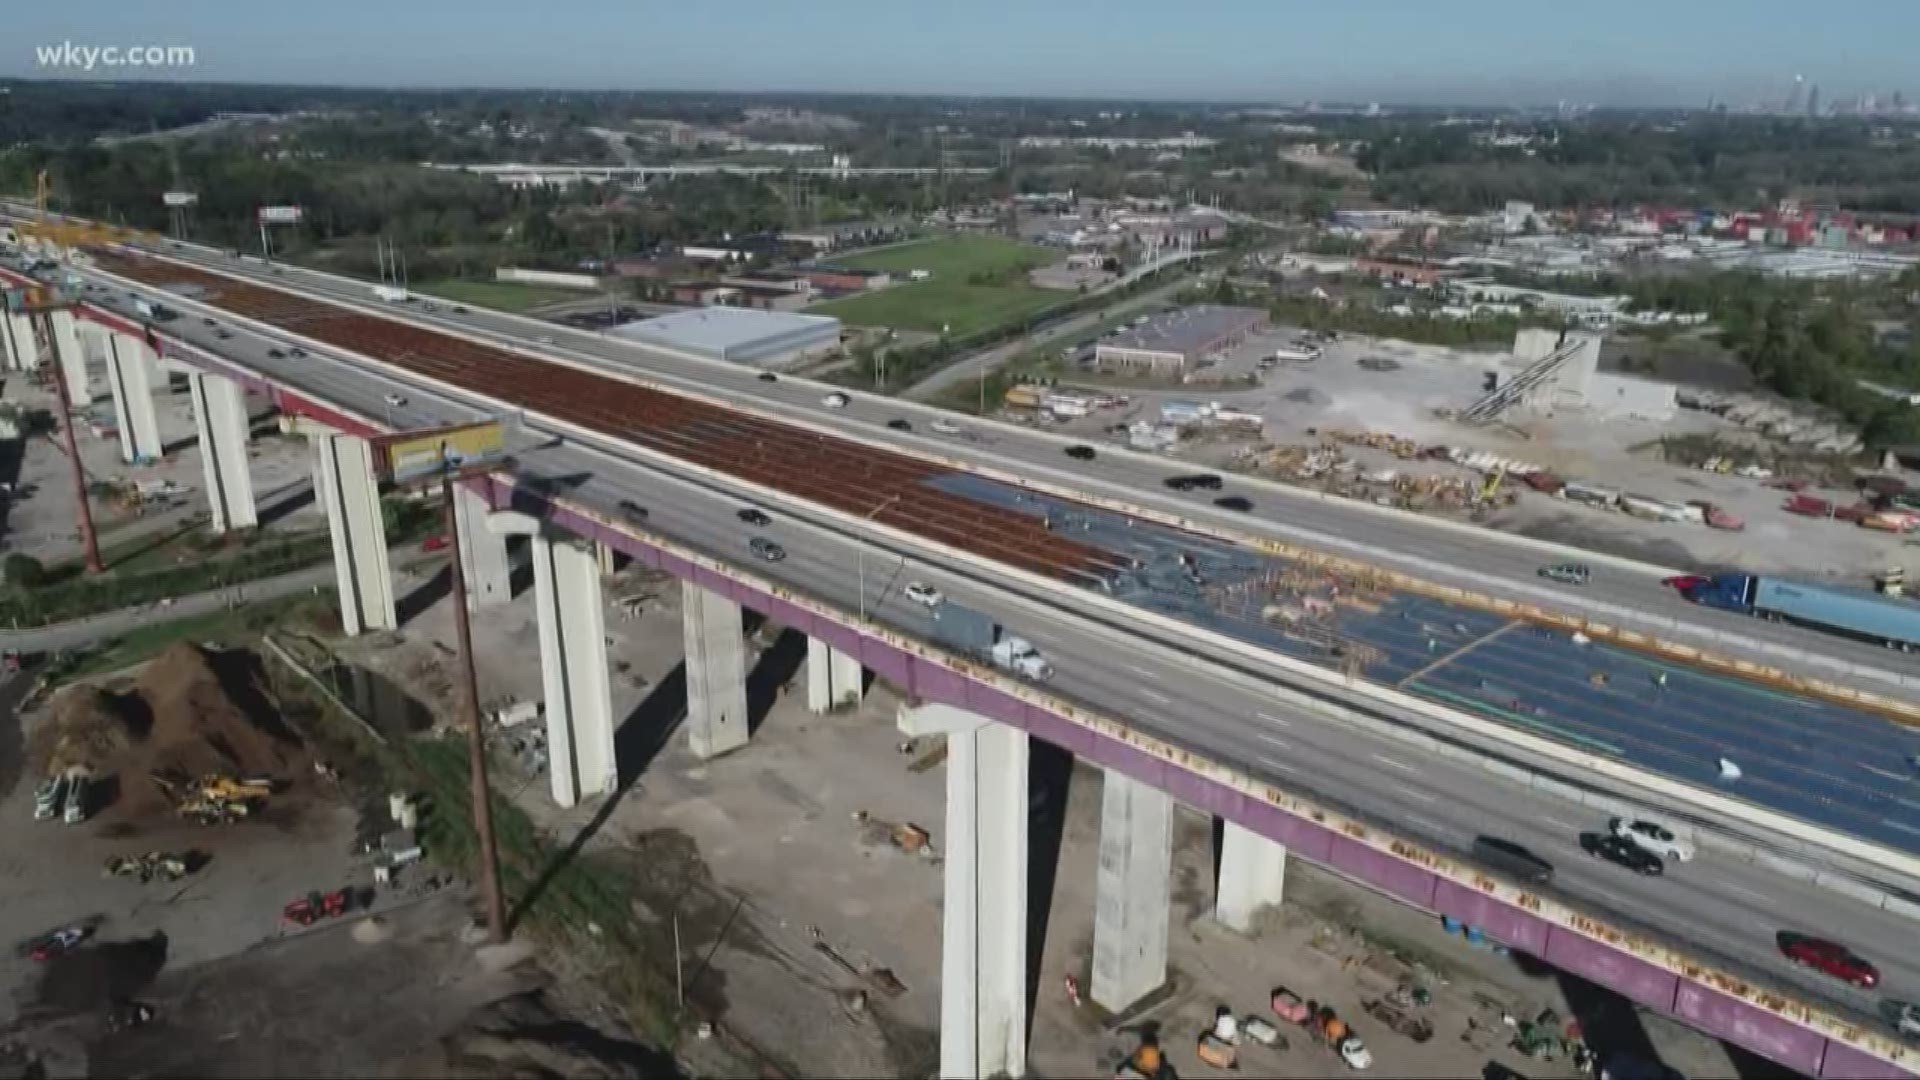 Valley View Bridge carries a whopping 180,000 vehicles per day, making it the most traveled bridge in the state. 2 bridges will become 3 by the year 2024.